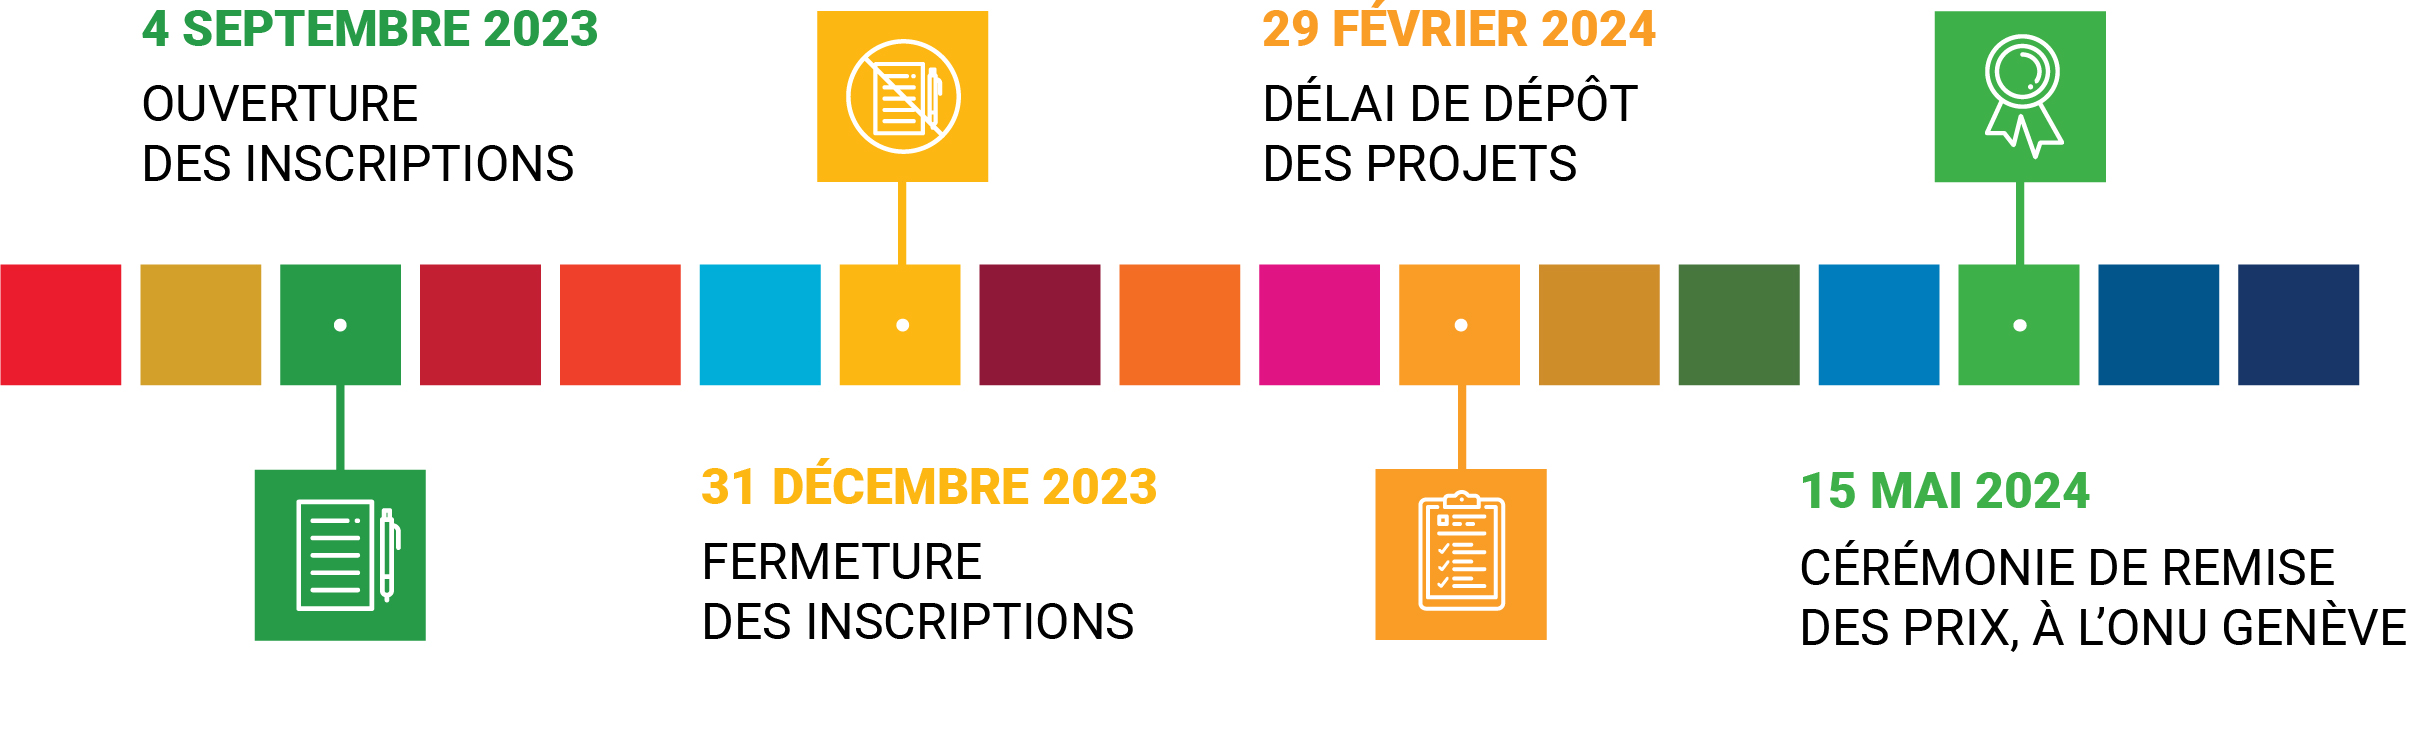 calendrier concours 2023/2024